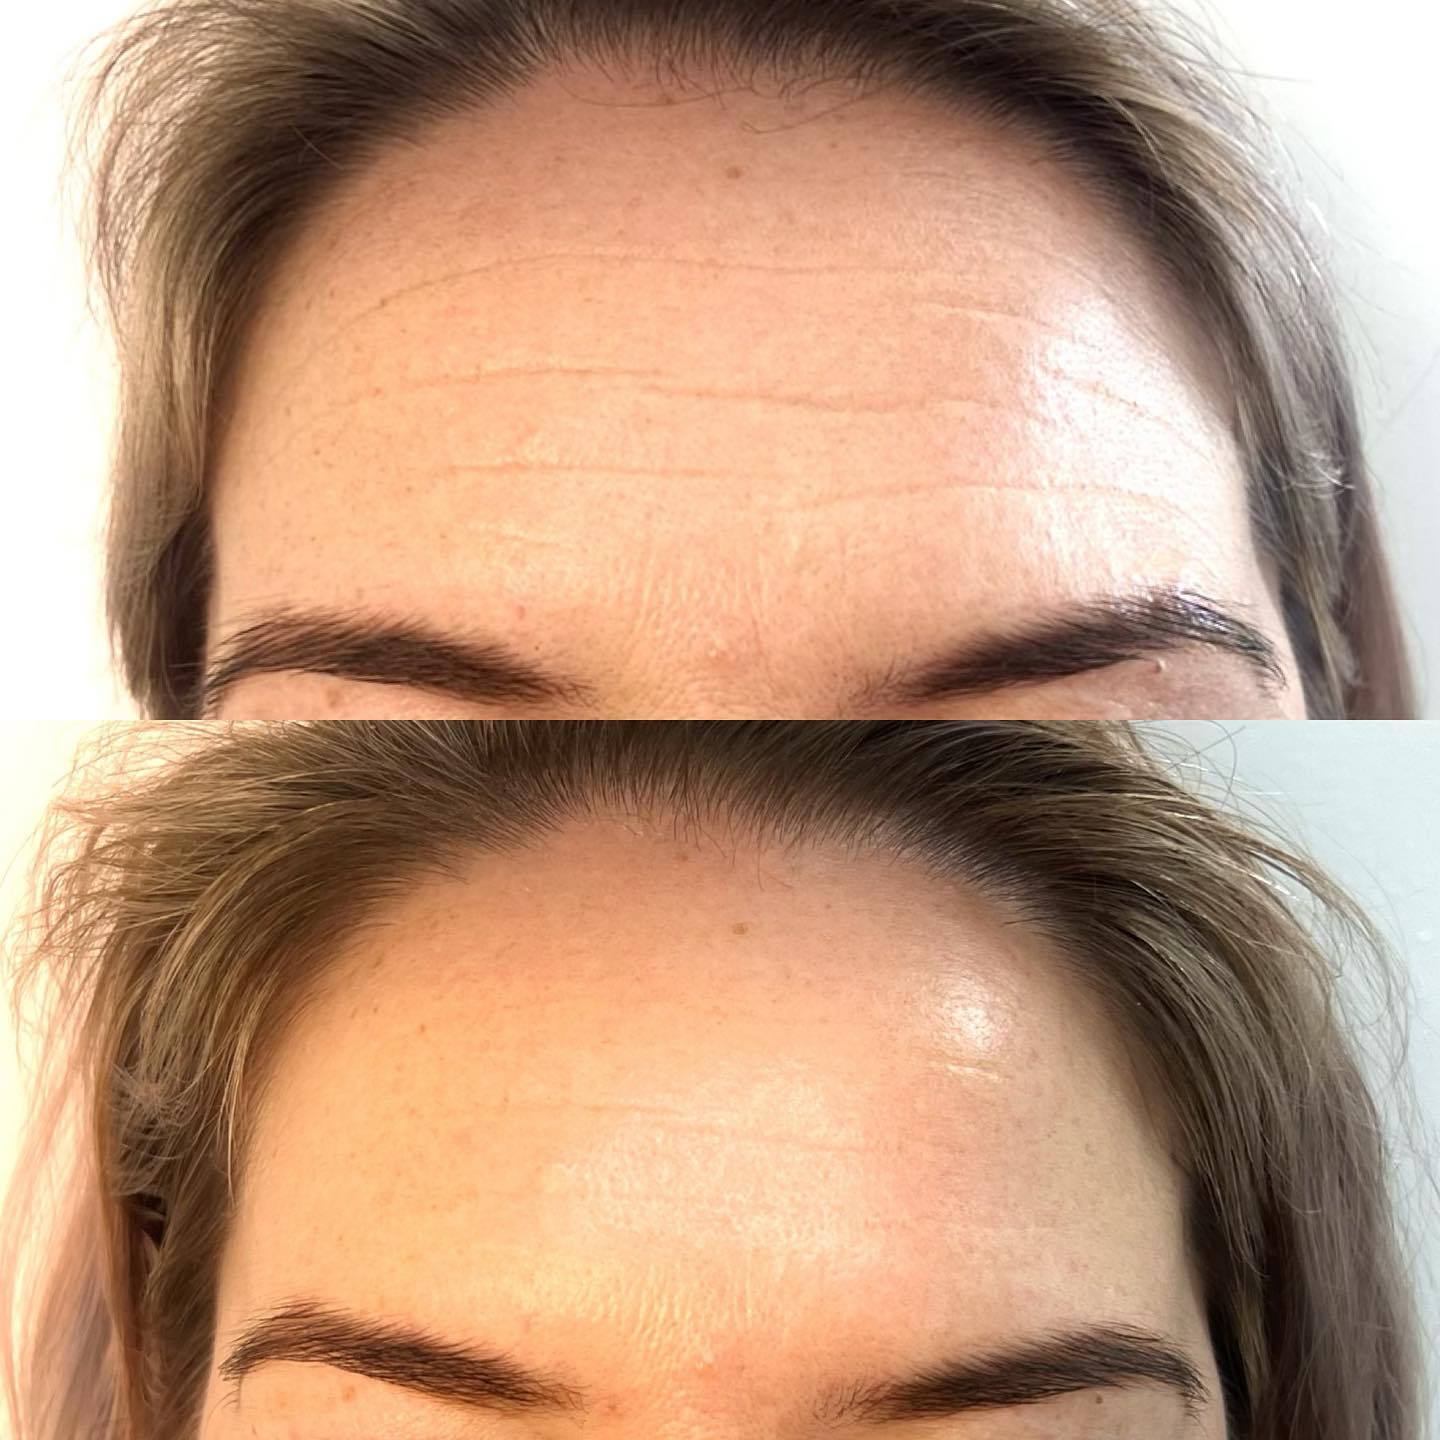 Before And After Photo Of Anti-Wrinkle Injection Procedure At Our Cosmetic Clinic in Wollongong